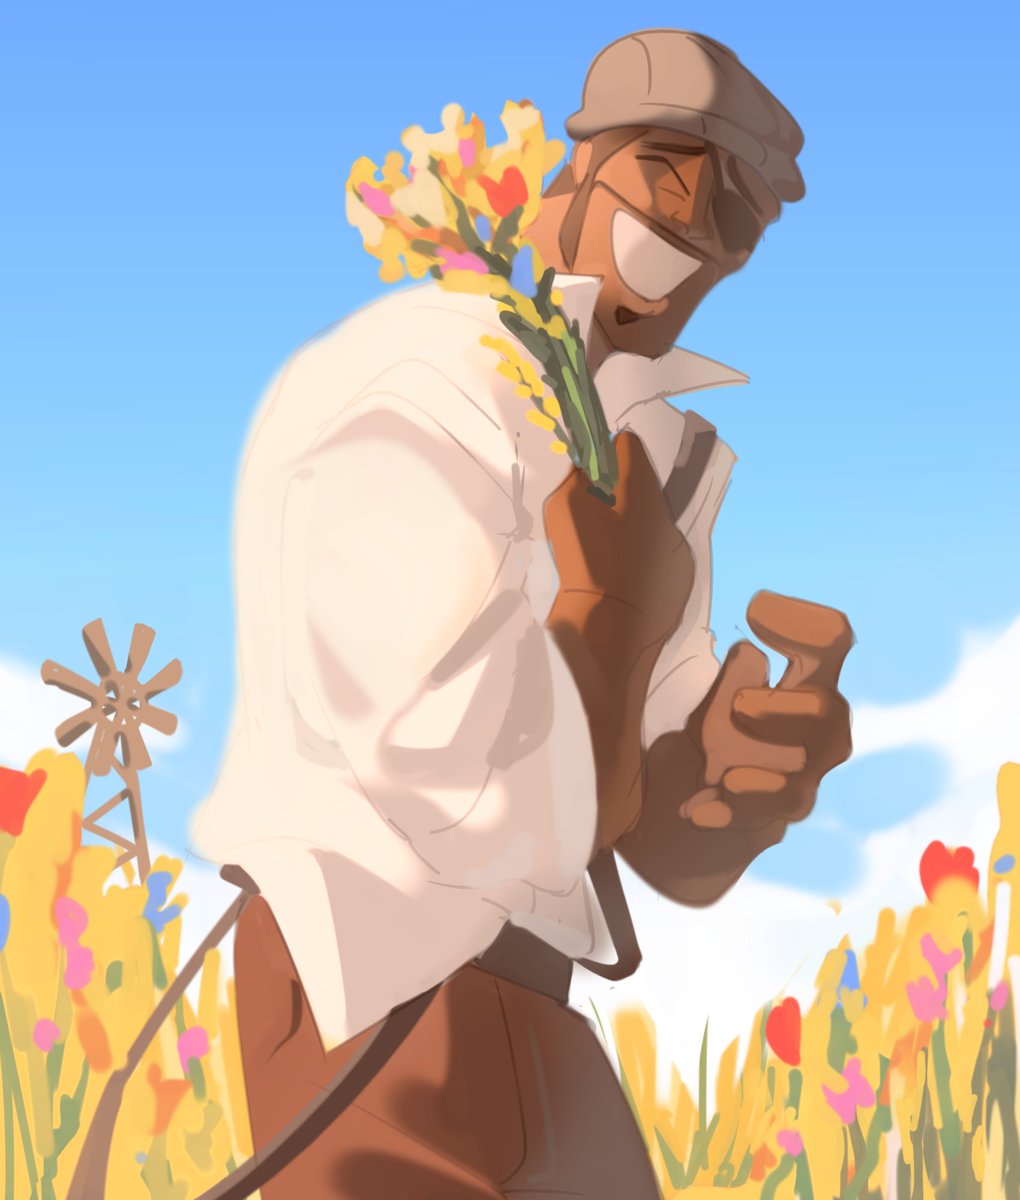 demo frolicking in a field request from tumblr !! #tf2